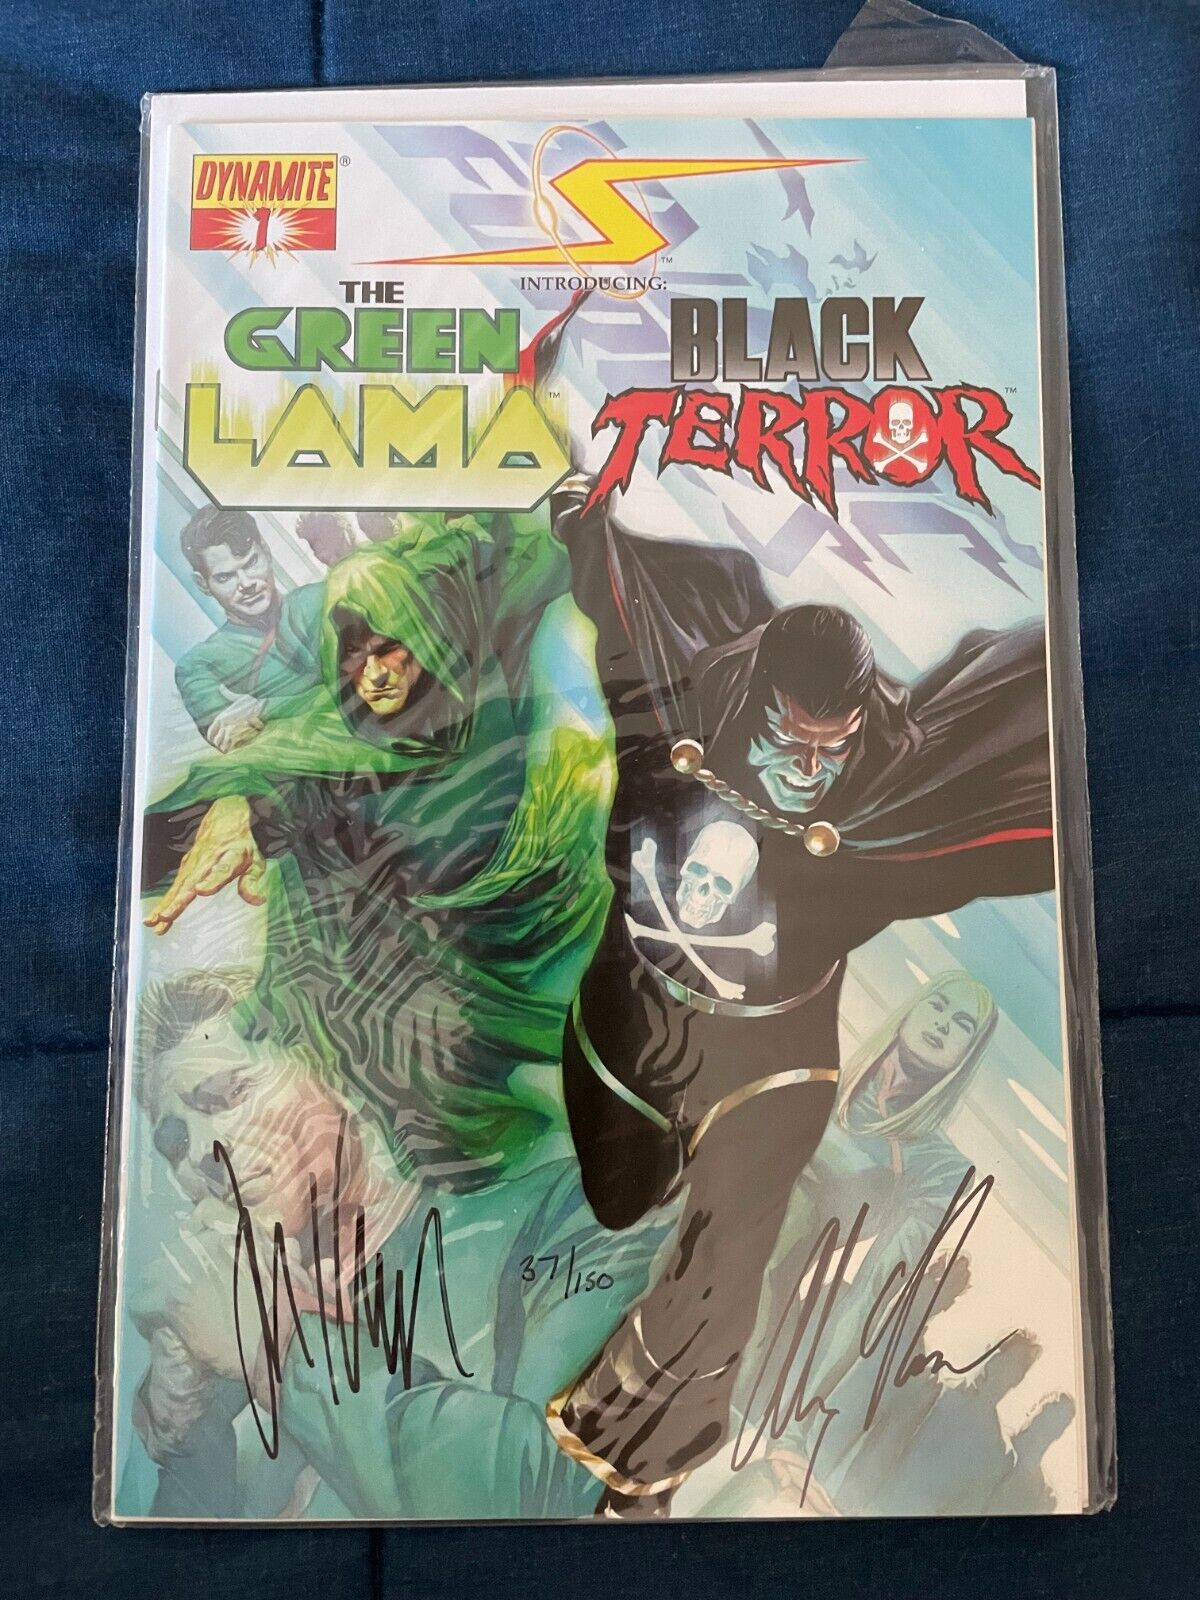 Project Superpowers (Dynamite, 2008) #1 Signed by Alex Ross & Jim Krueger w/ COA